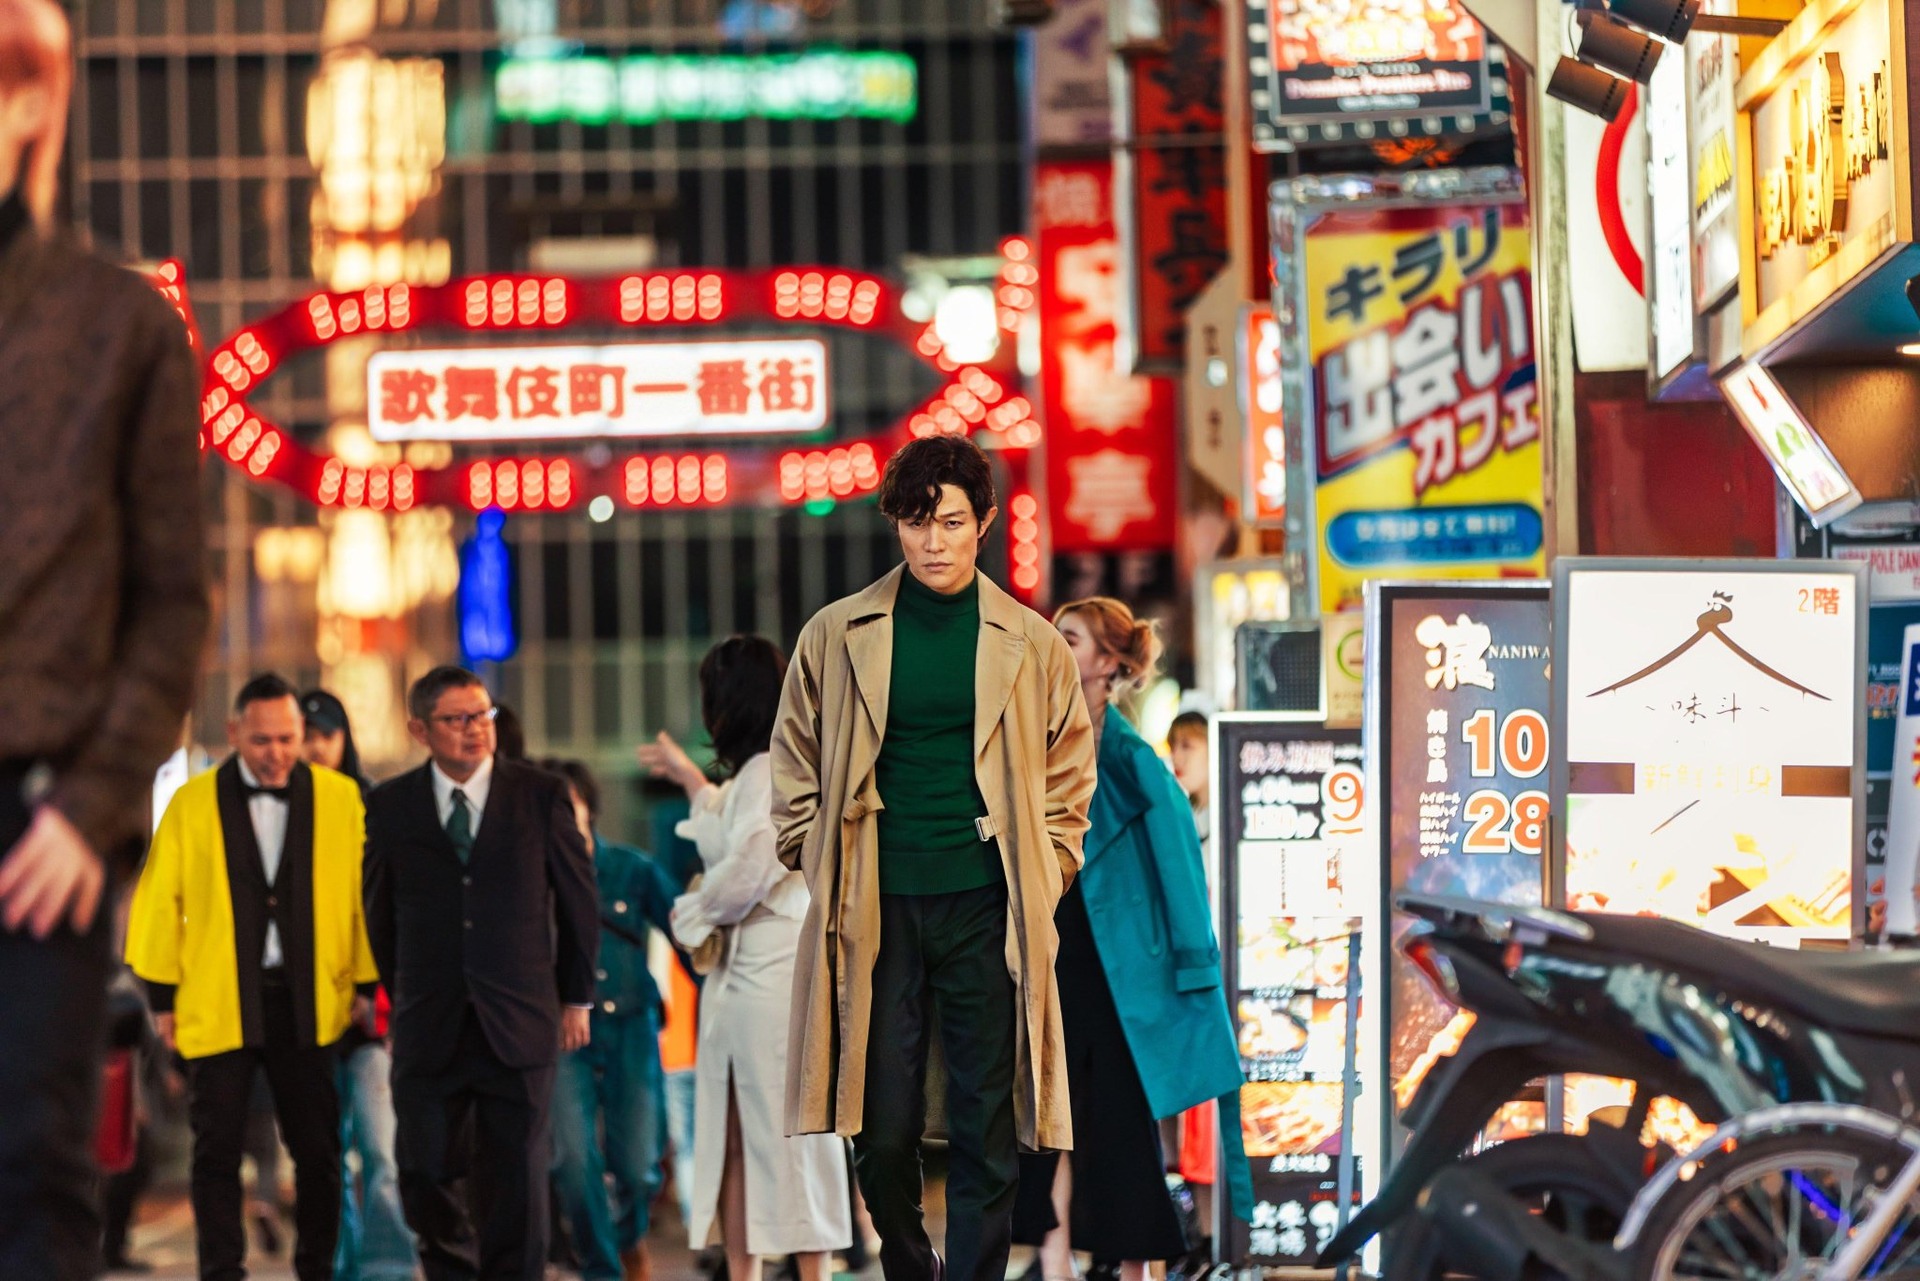 A man in a trench coat on a Tokyo street in this image from Horipro.